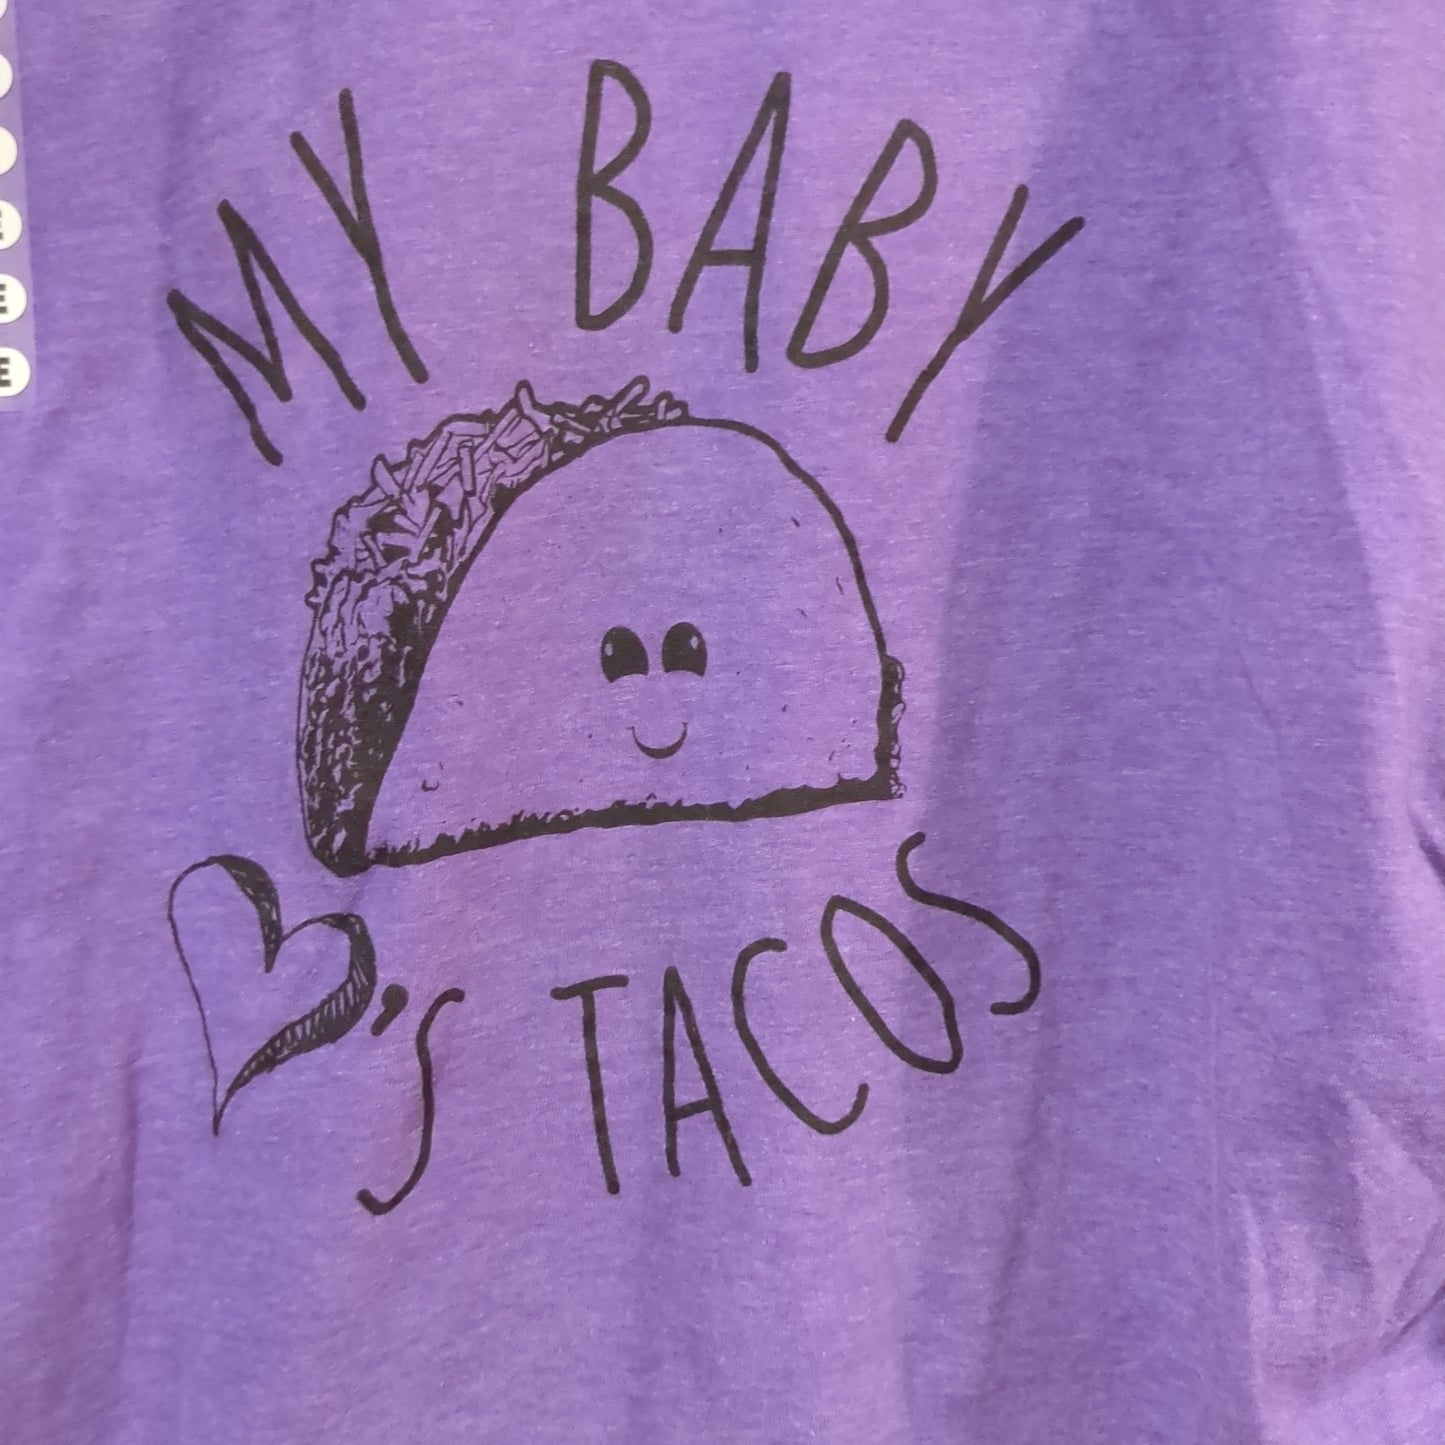 'My baby loves tacos' graphic SS tee, Purple